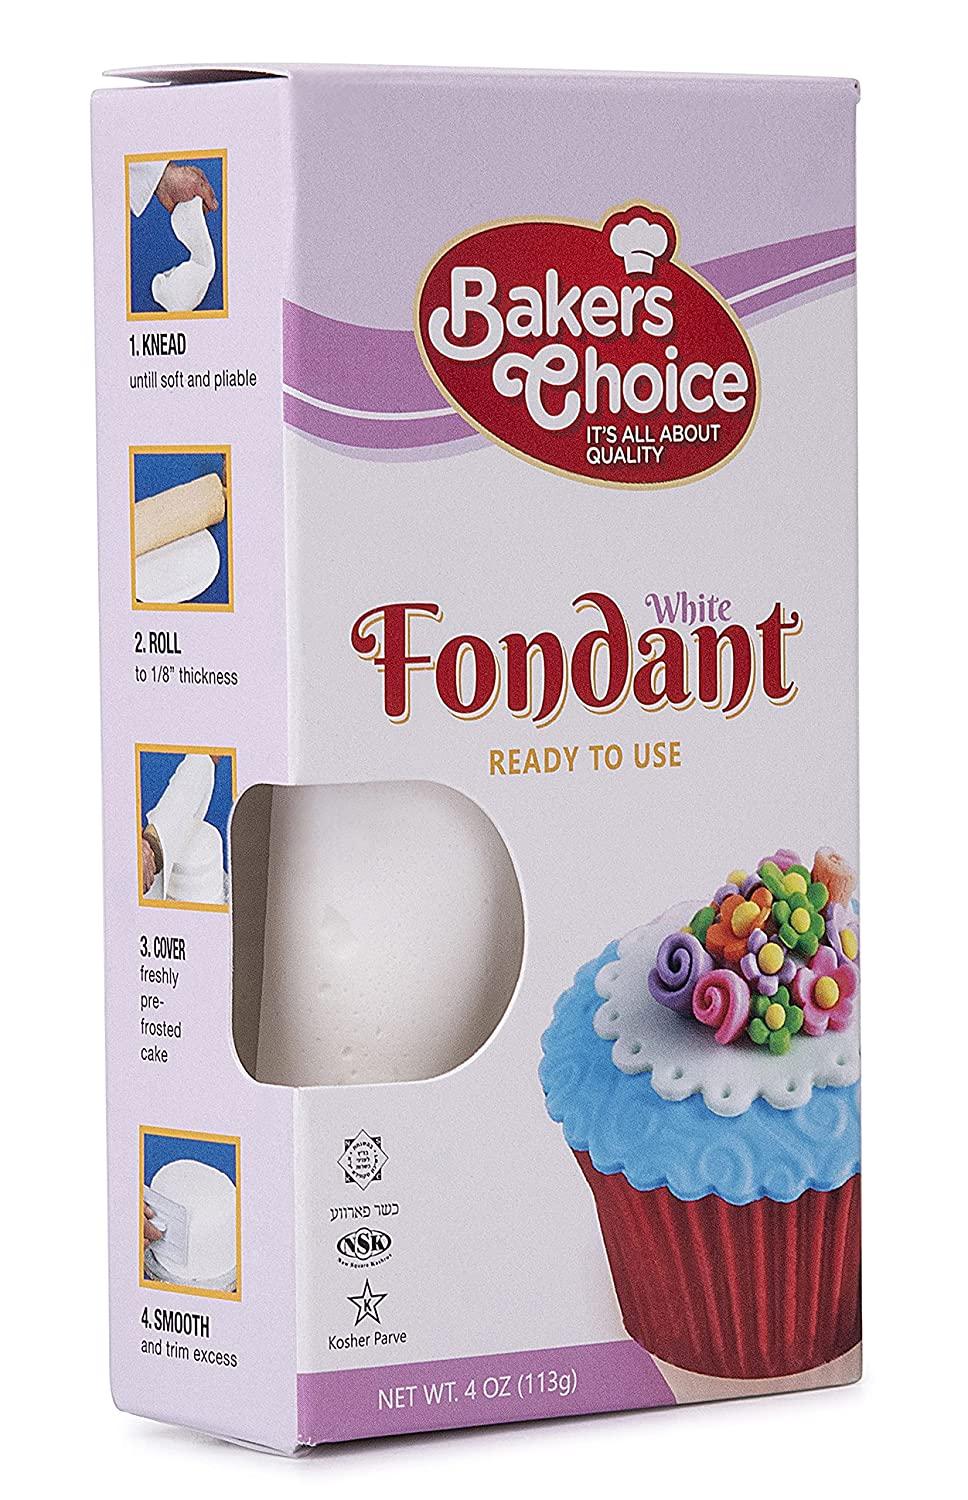 DECOCINO Roll fondant blanket white - 300g - ready to use fondant blanket  for covering & decorating cakes and cakes - gluten free & vegan :  : Grocery